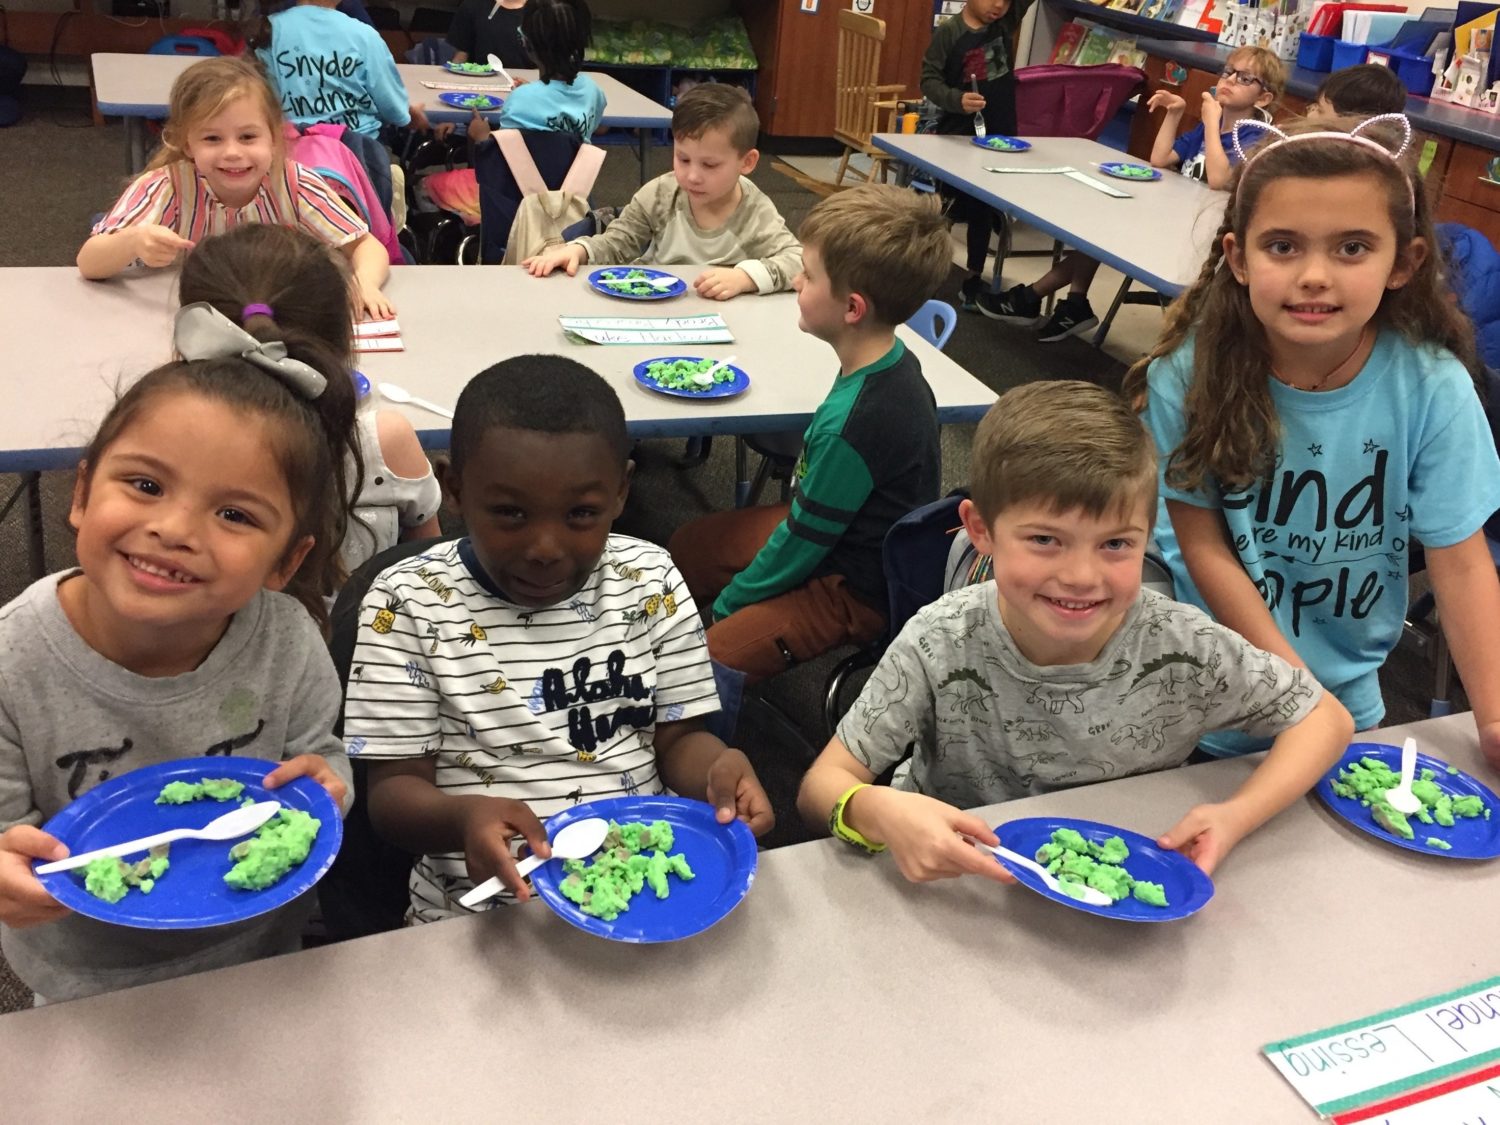 "four children sit at a table with green eggs and ham on their plates"